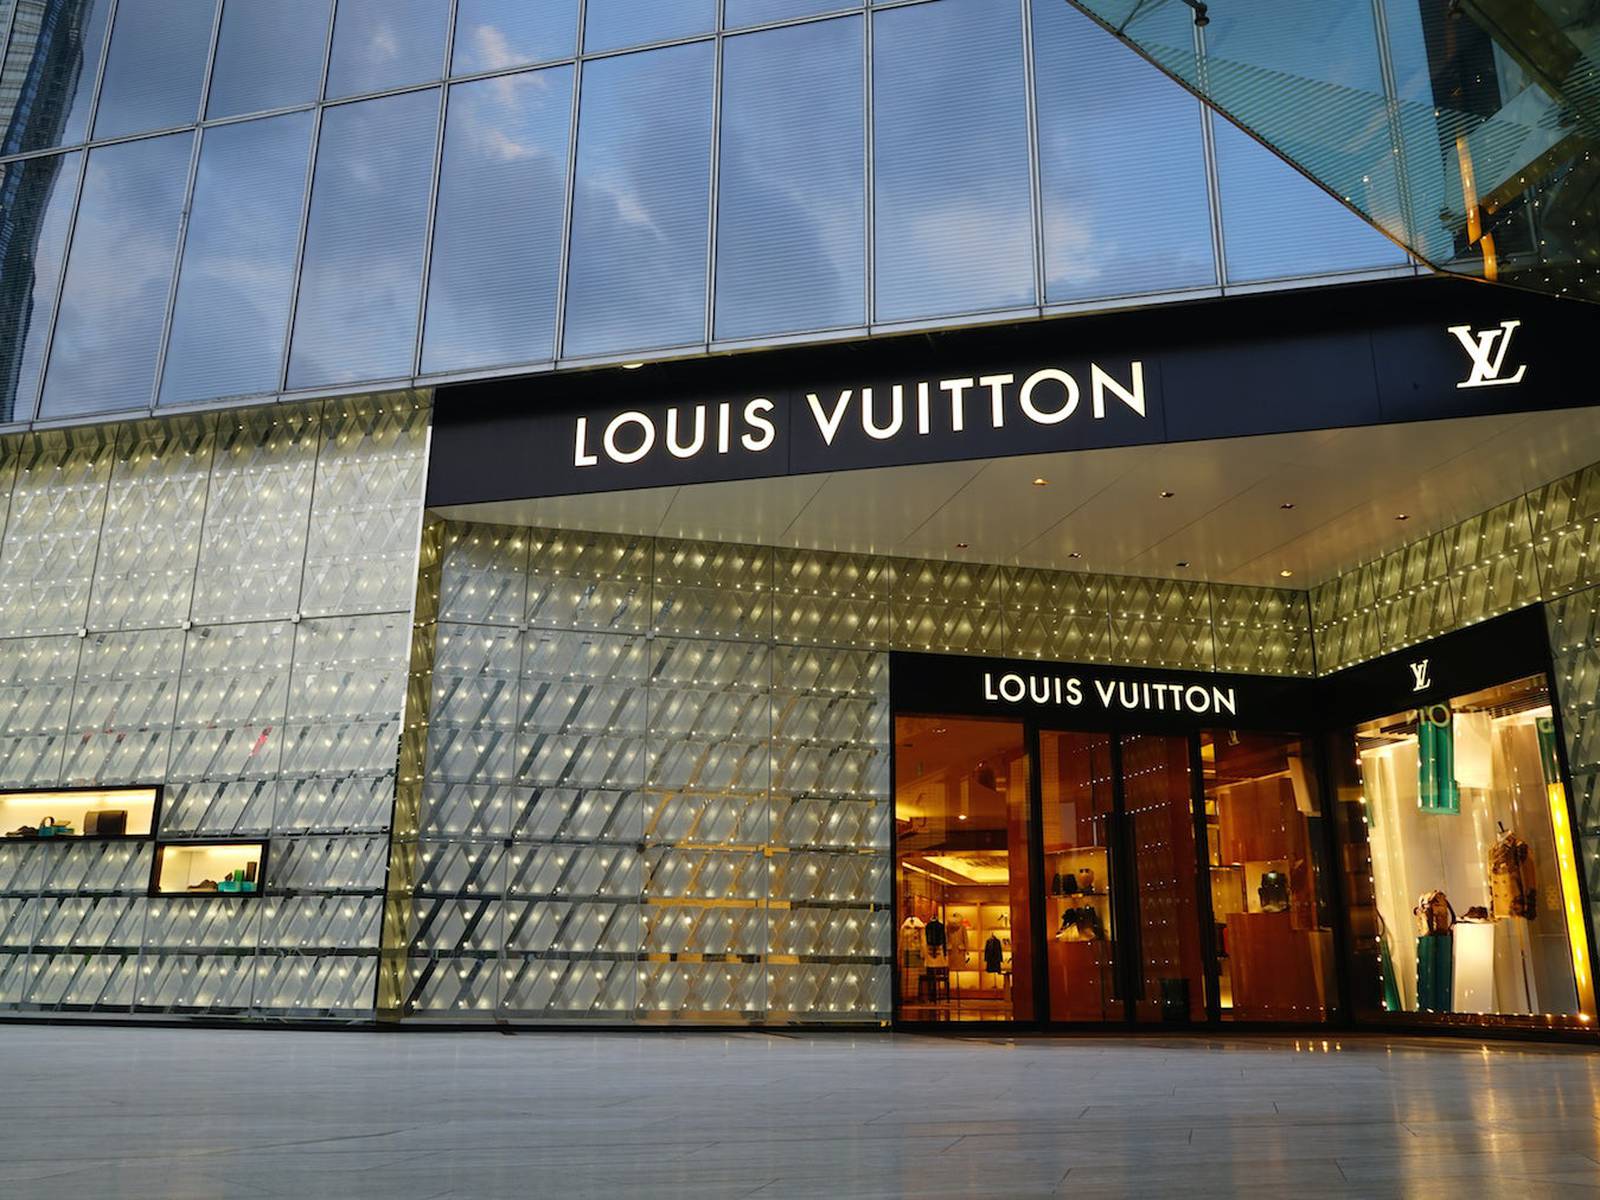 With 'Pop-Ups' Menswear, Louis Vuitton Aims to Keep Luxury Crown | BoF